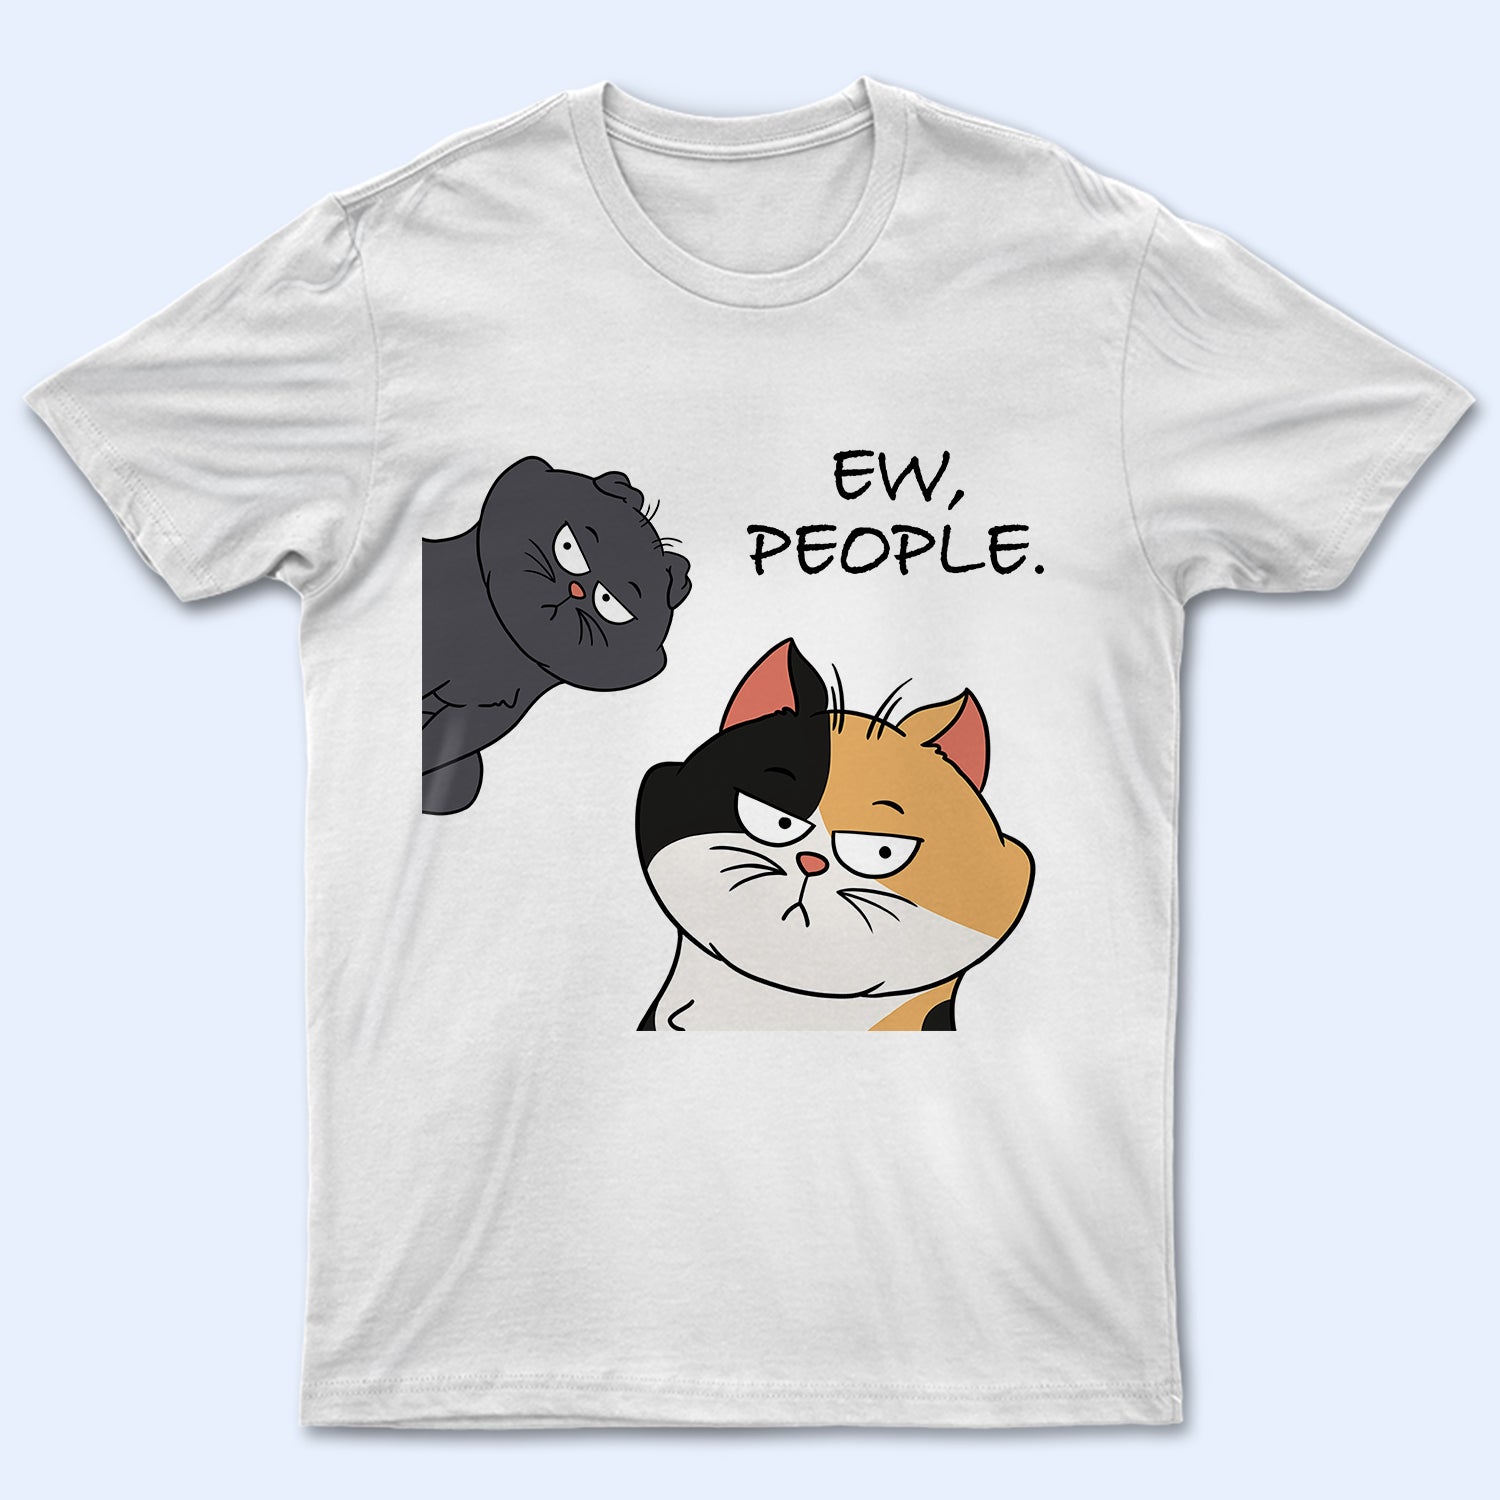 Ew People - Birthday, Anniversary, Funny Gift For Cat Lovers, Cat Mom, Cat Dad - Personalized T Shirt